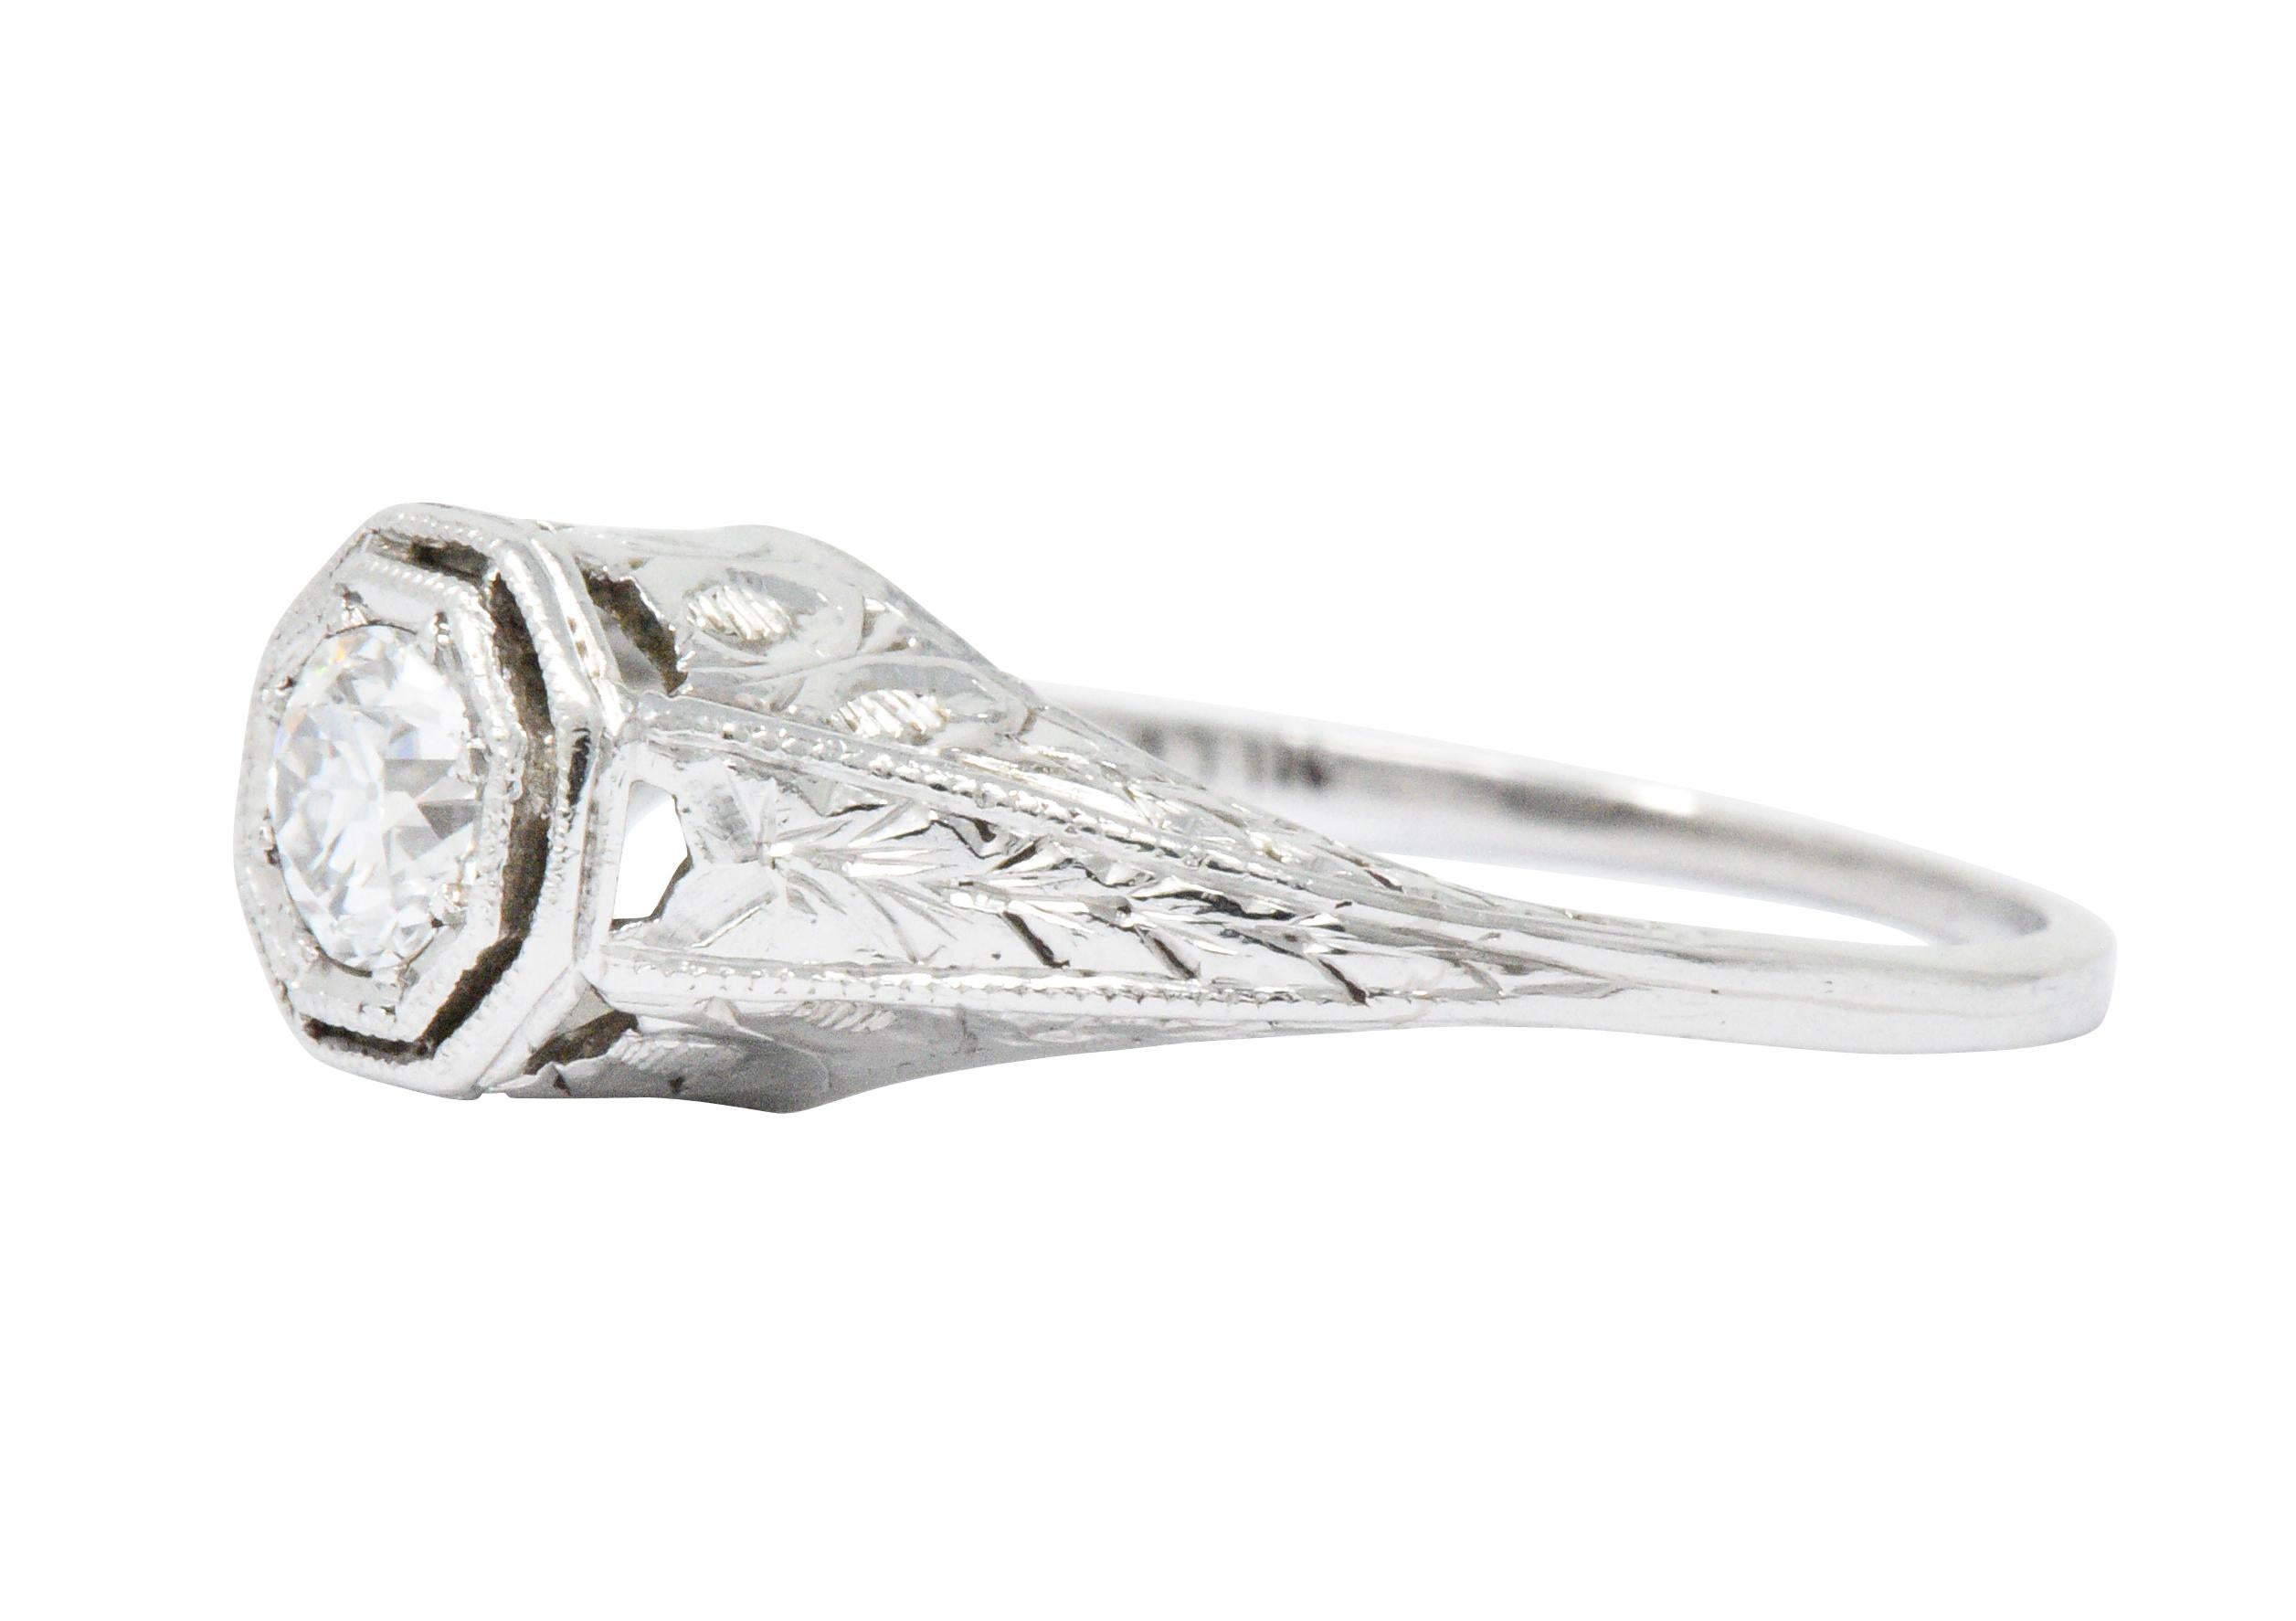 Centering an old European cut diamond weighing approximately 0.25 carat, H color with SI clarity

Set low in a Octagonal head flanked by engraved foliate shoulders

With unique geometric motif profile details

Tested as platinum

Circa: 1930s

Ring